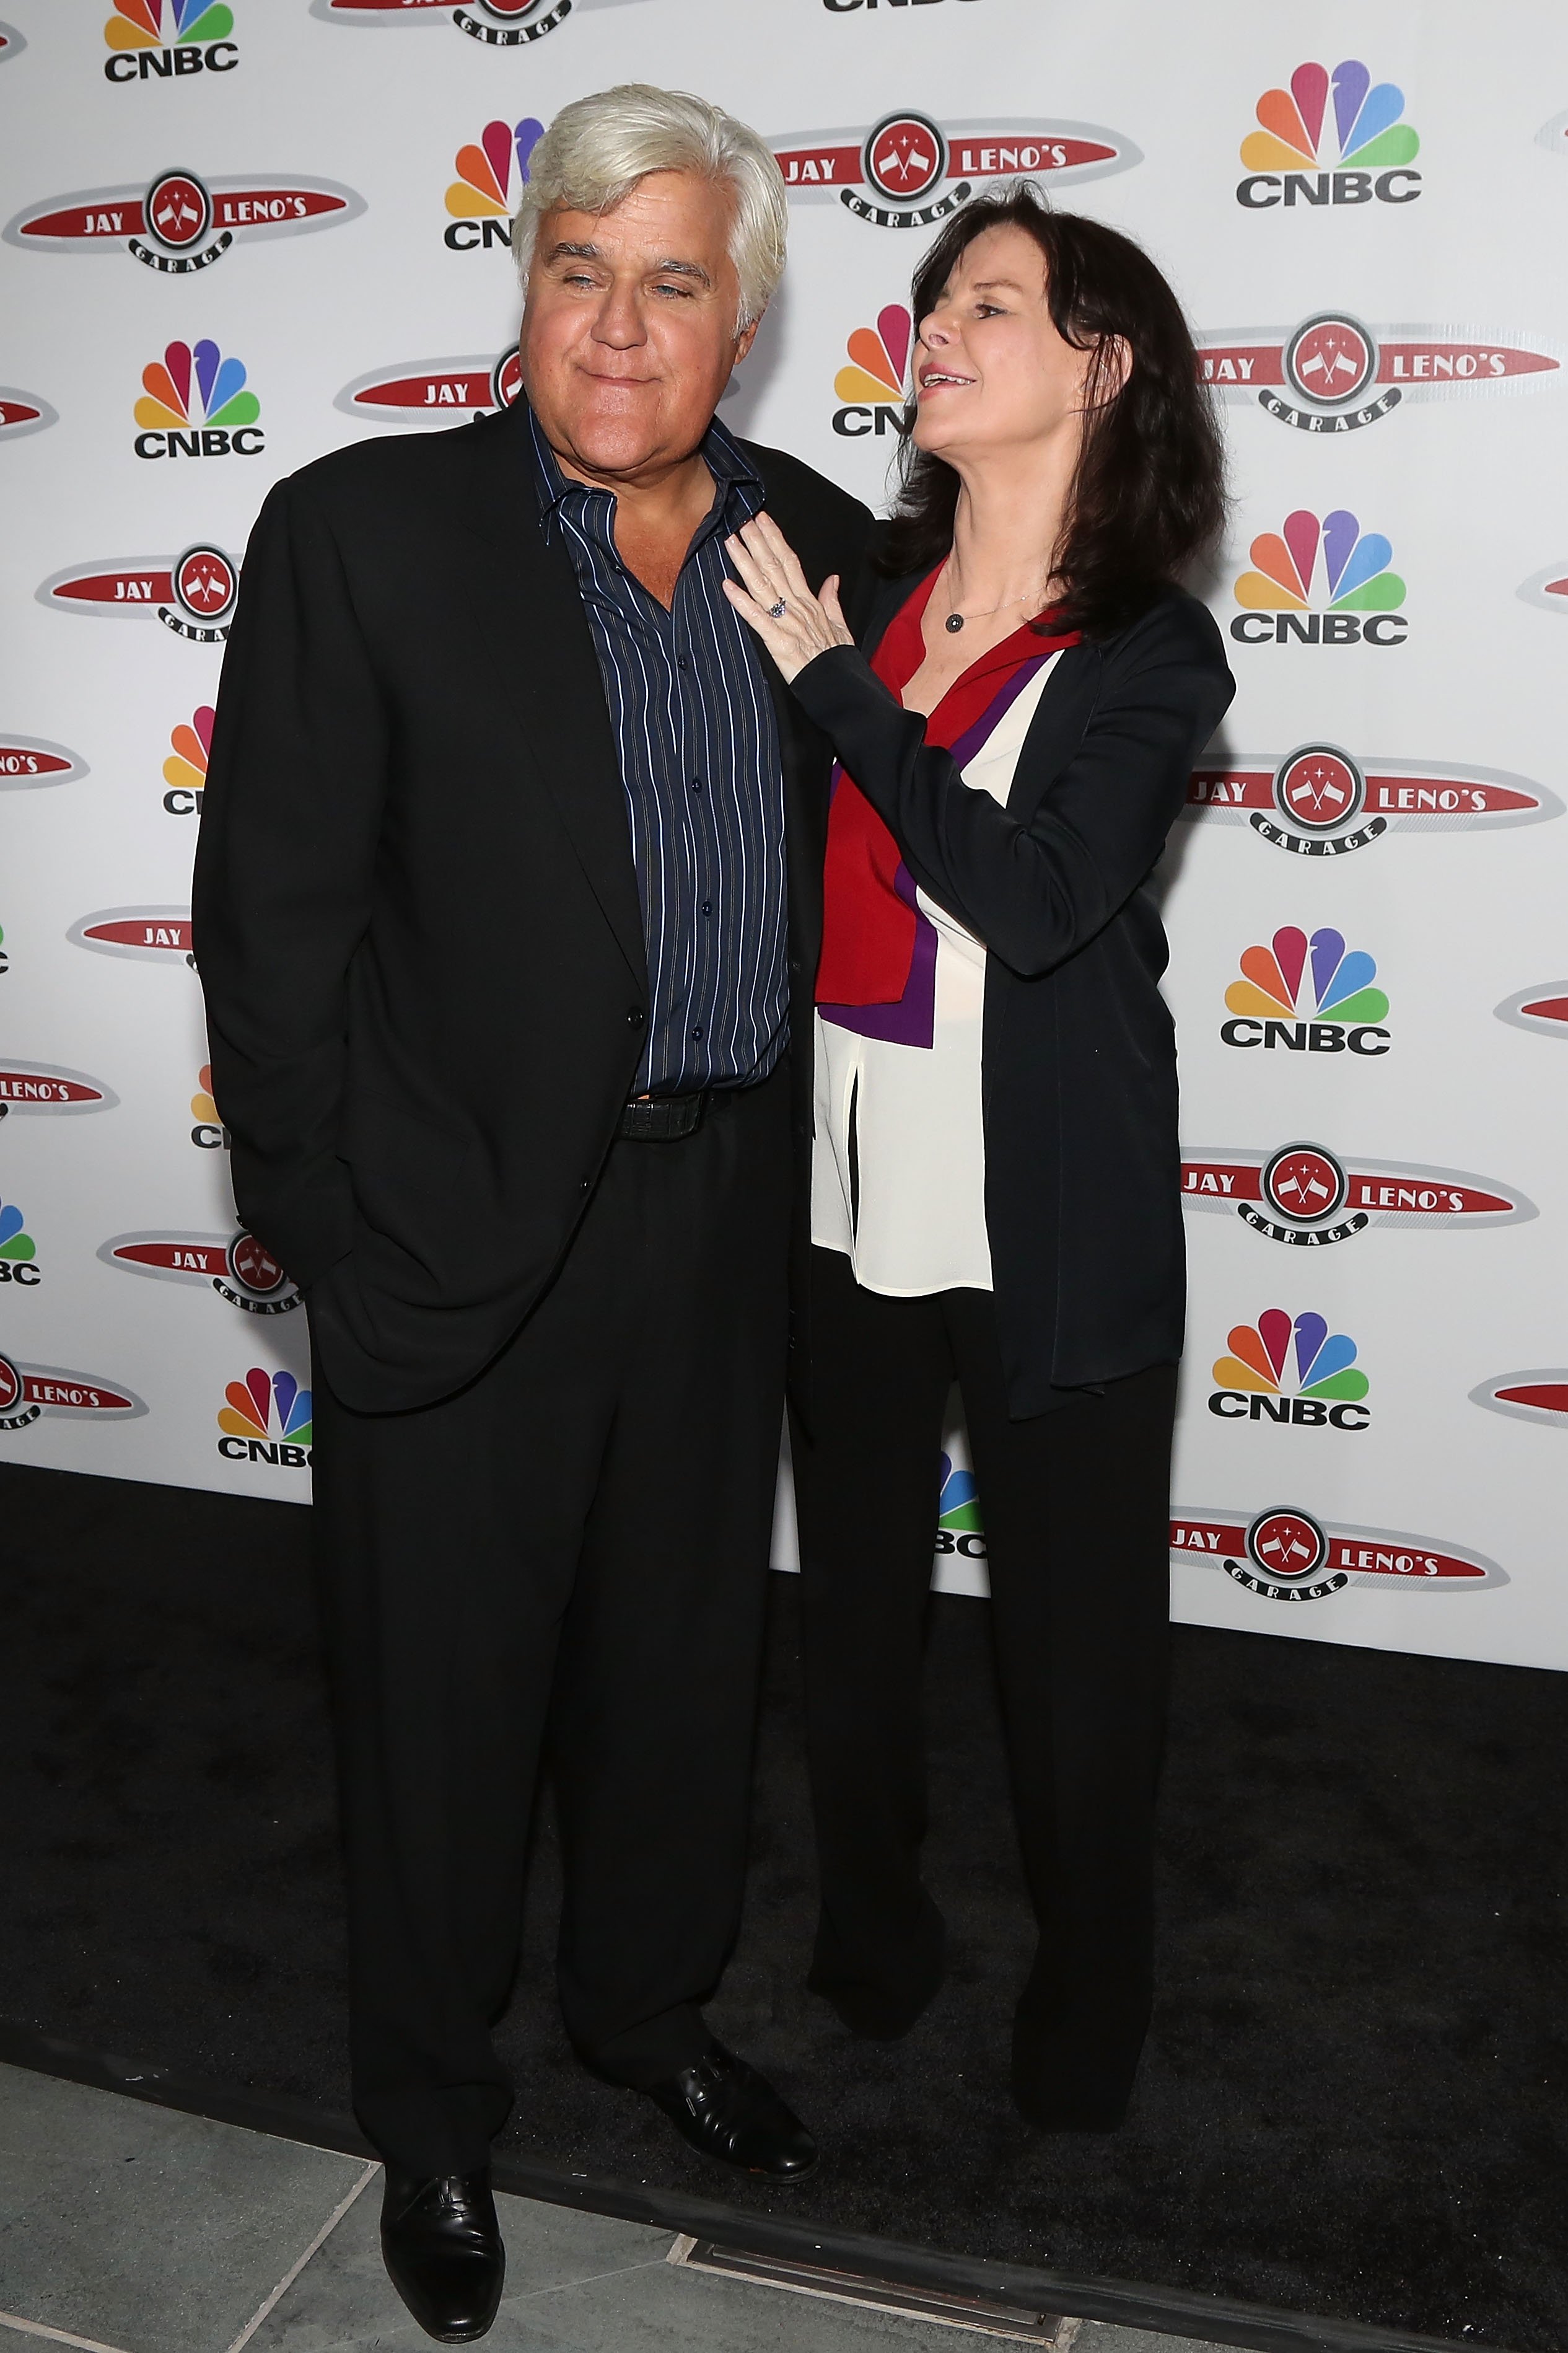 Jay and Mavis Leno at the premiere of "Jay Leno's Garage" on October 7, 2015, in New York City. | Source: Getty Images